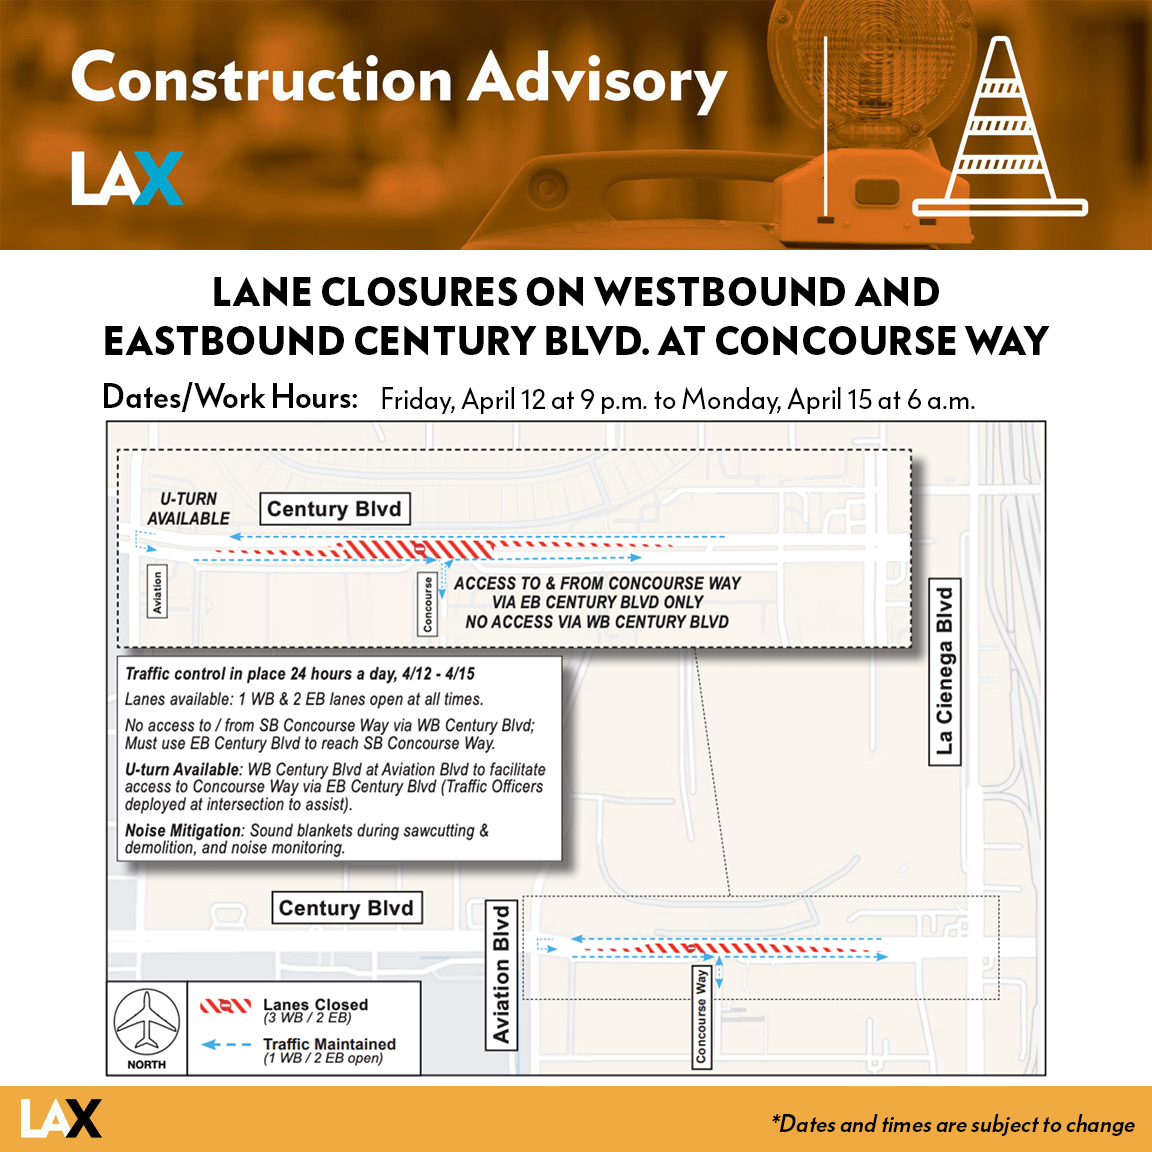 To facilitate work for the Roadway and Utility Enabling (RUE) project, three westbound and two eastbound lanes on Century Blvd at Concourse Way (between La Cienega Blvd & Aviation Blvd) will be closed from Friday, April 12 at 9 PM to Monday, April 15 at 6 AM.